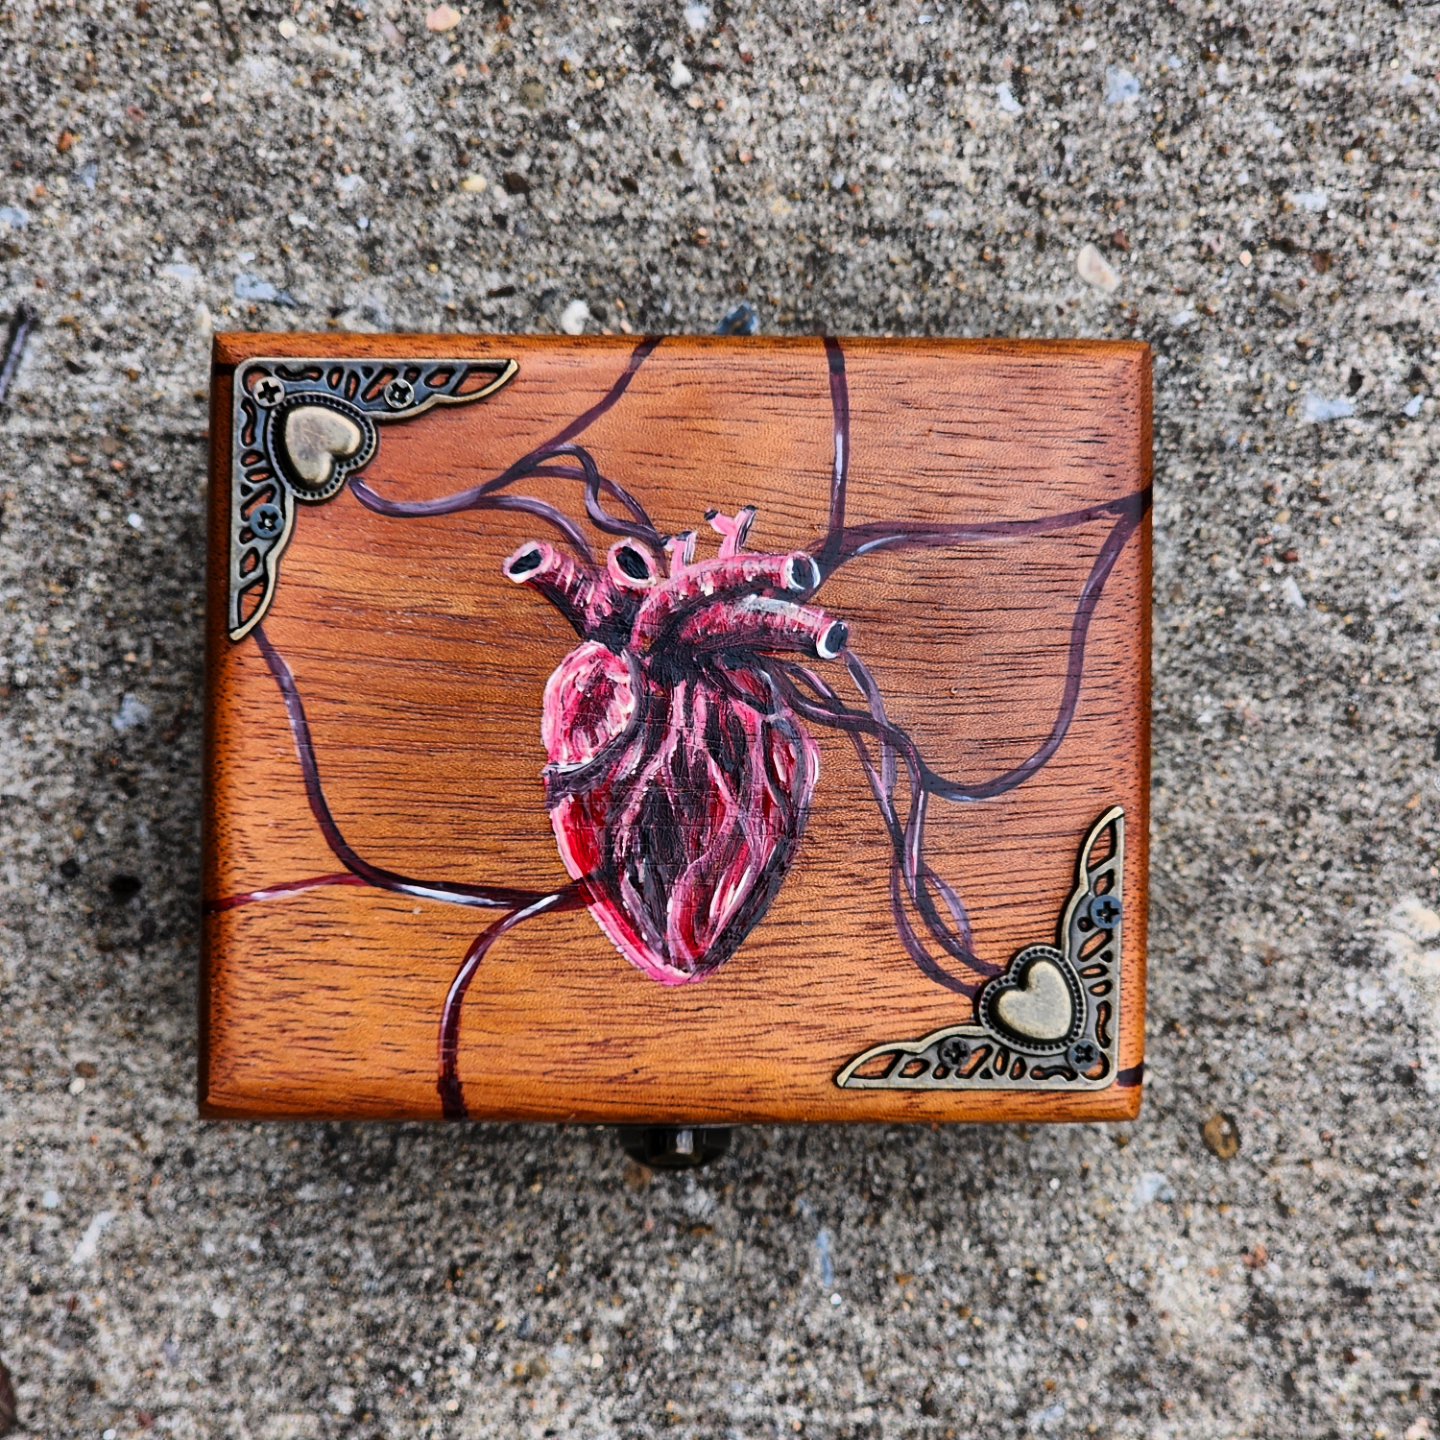 Antique wooden box that was repurposed into this beautiful trinket/jewelry box. I handpainted a creepy-cool anatomical heart with some evil eyes.